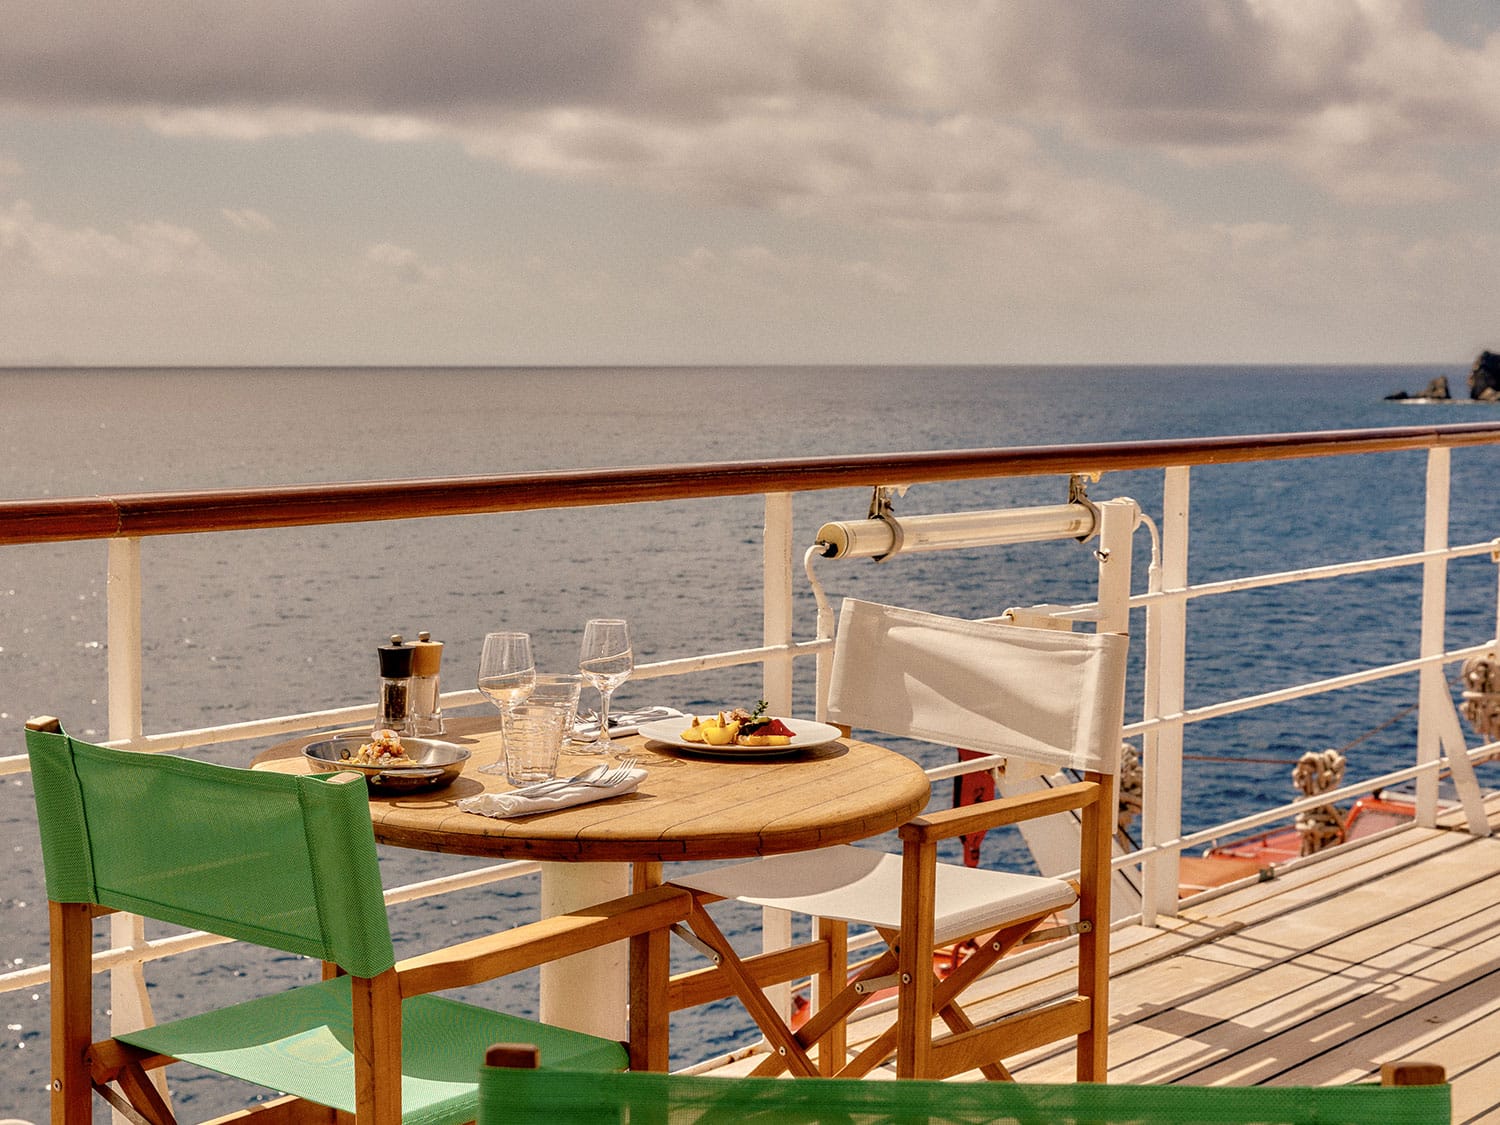 The deck dining experience and view from the Club Med 2 luxury sailing yacht.